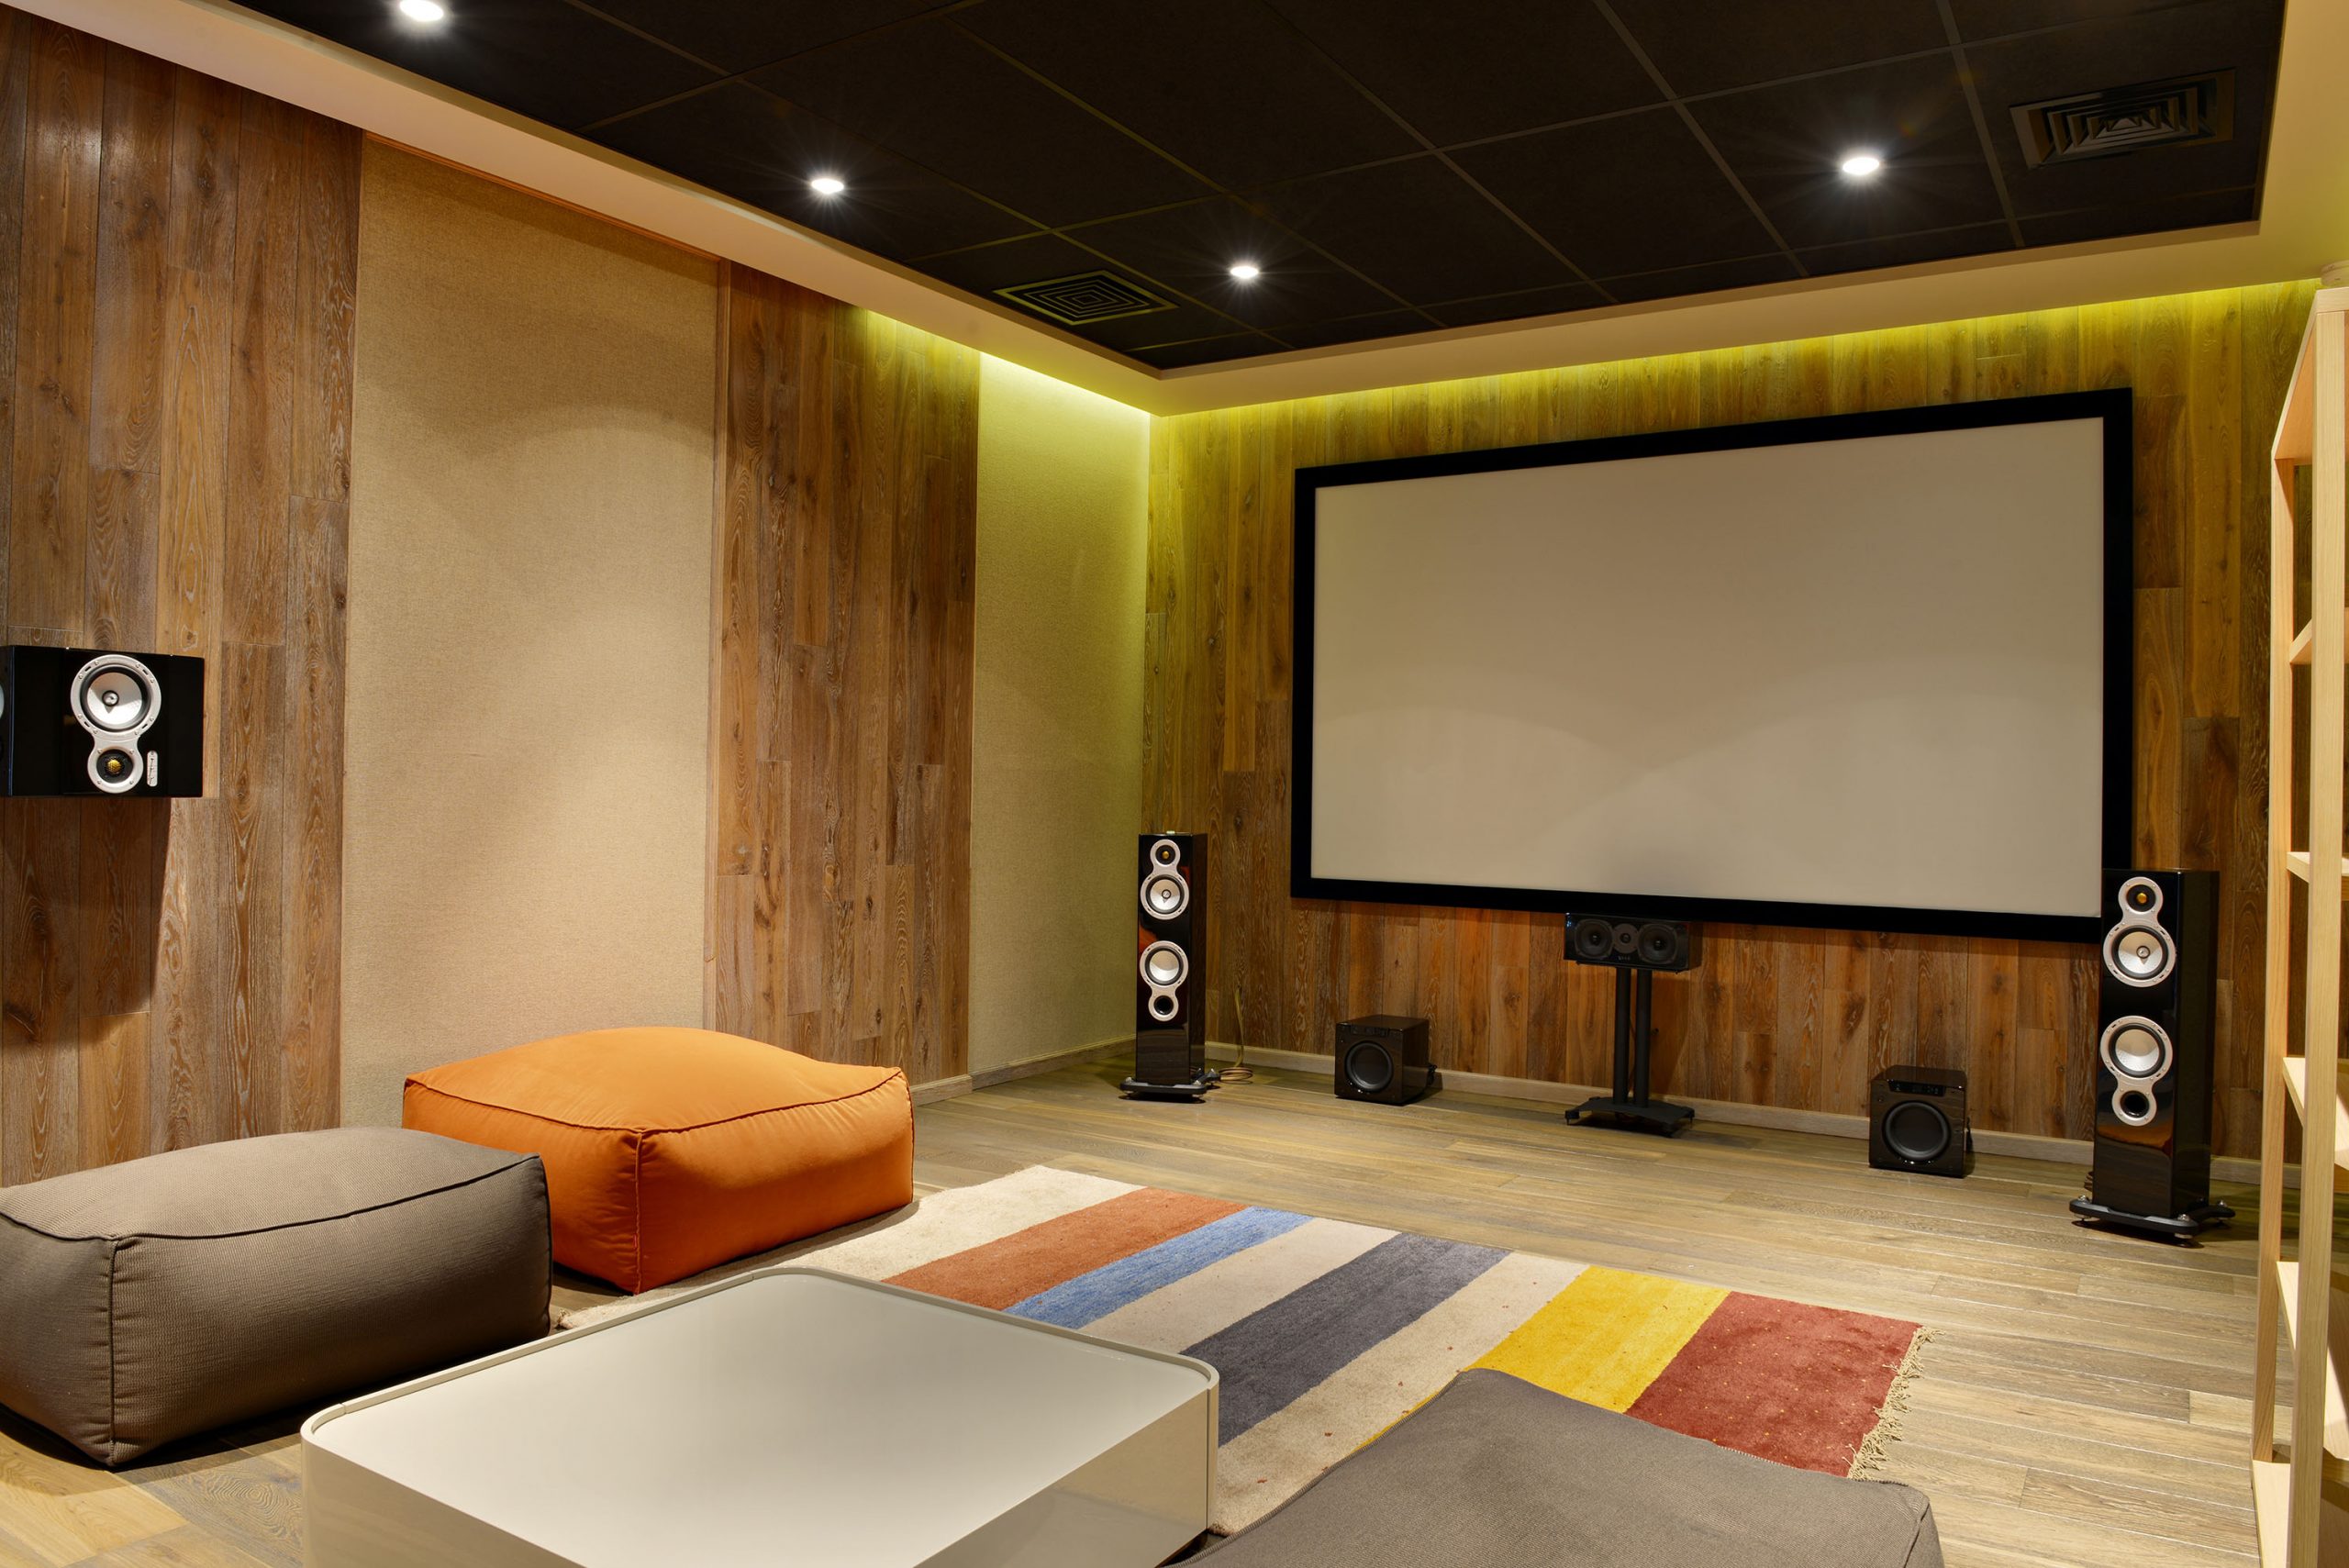 Featured image for “Selecting the Right Company to Build Your Home Media Room: How to Know If They’re Qualified”